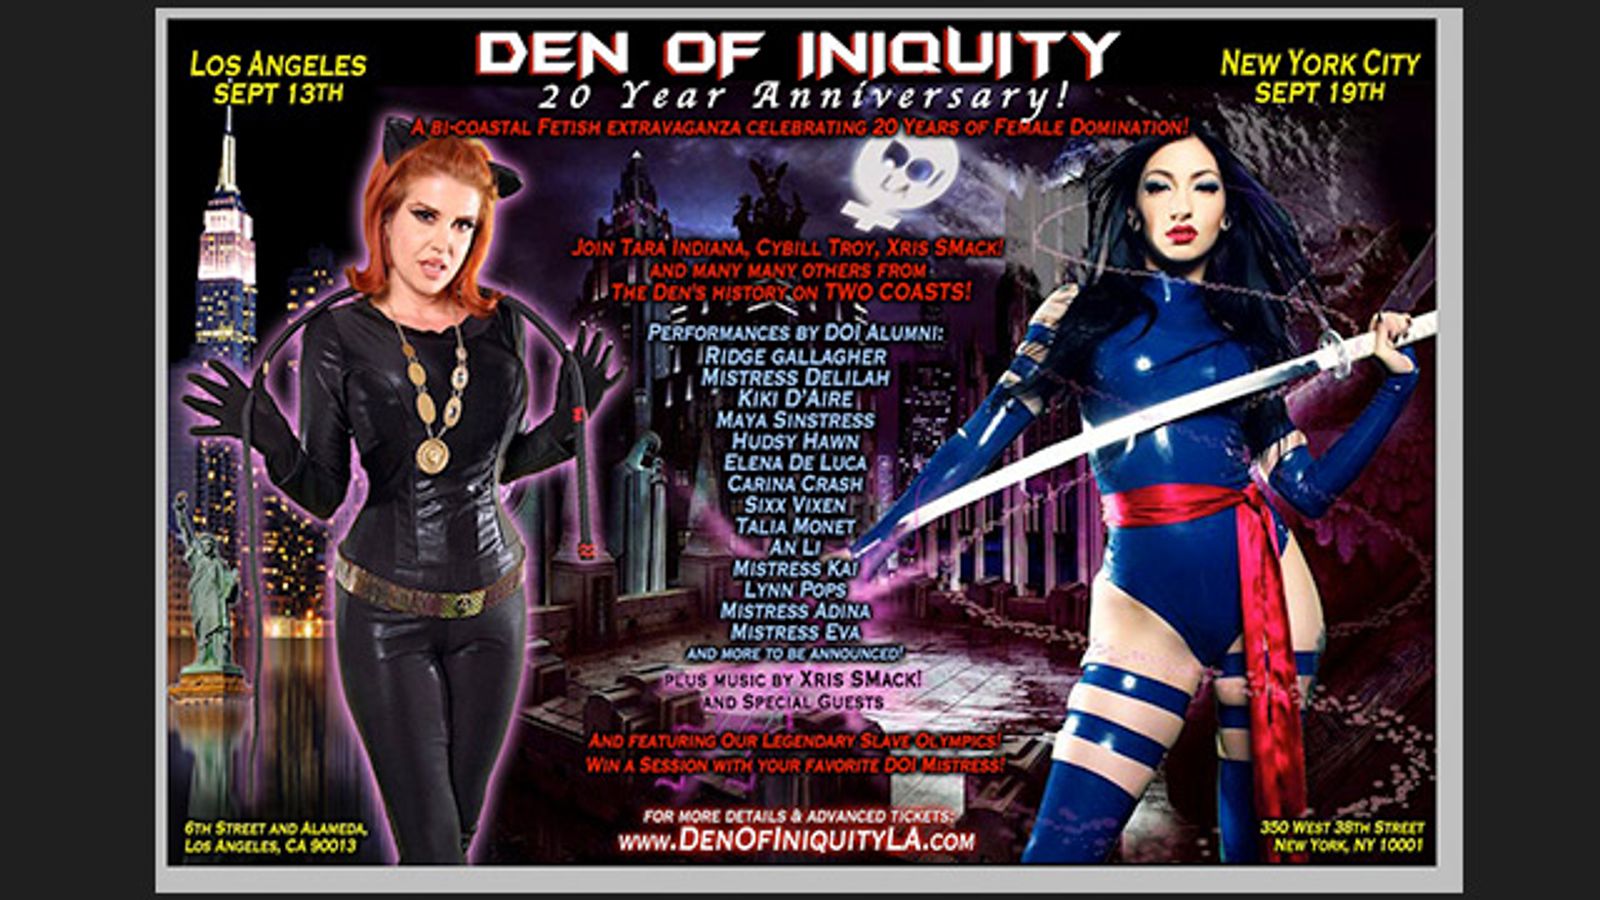 Fans Can Party with The Den of Iniquity This Saturday